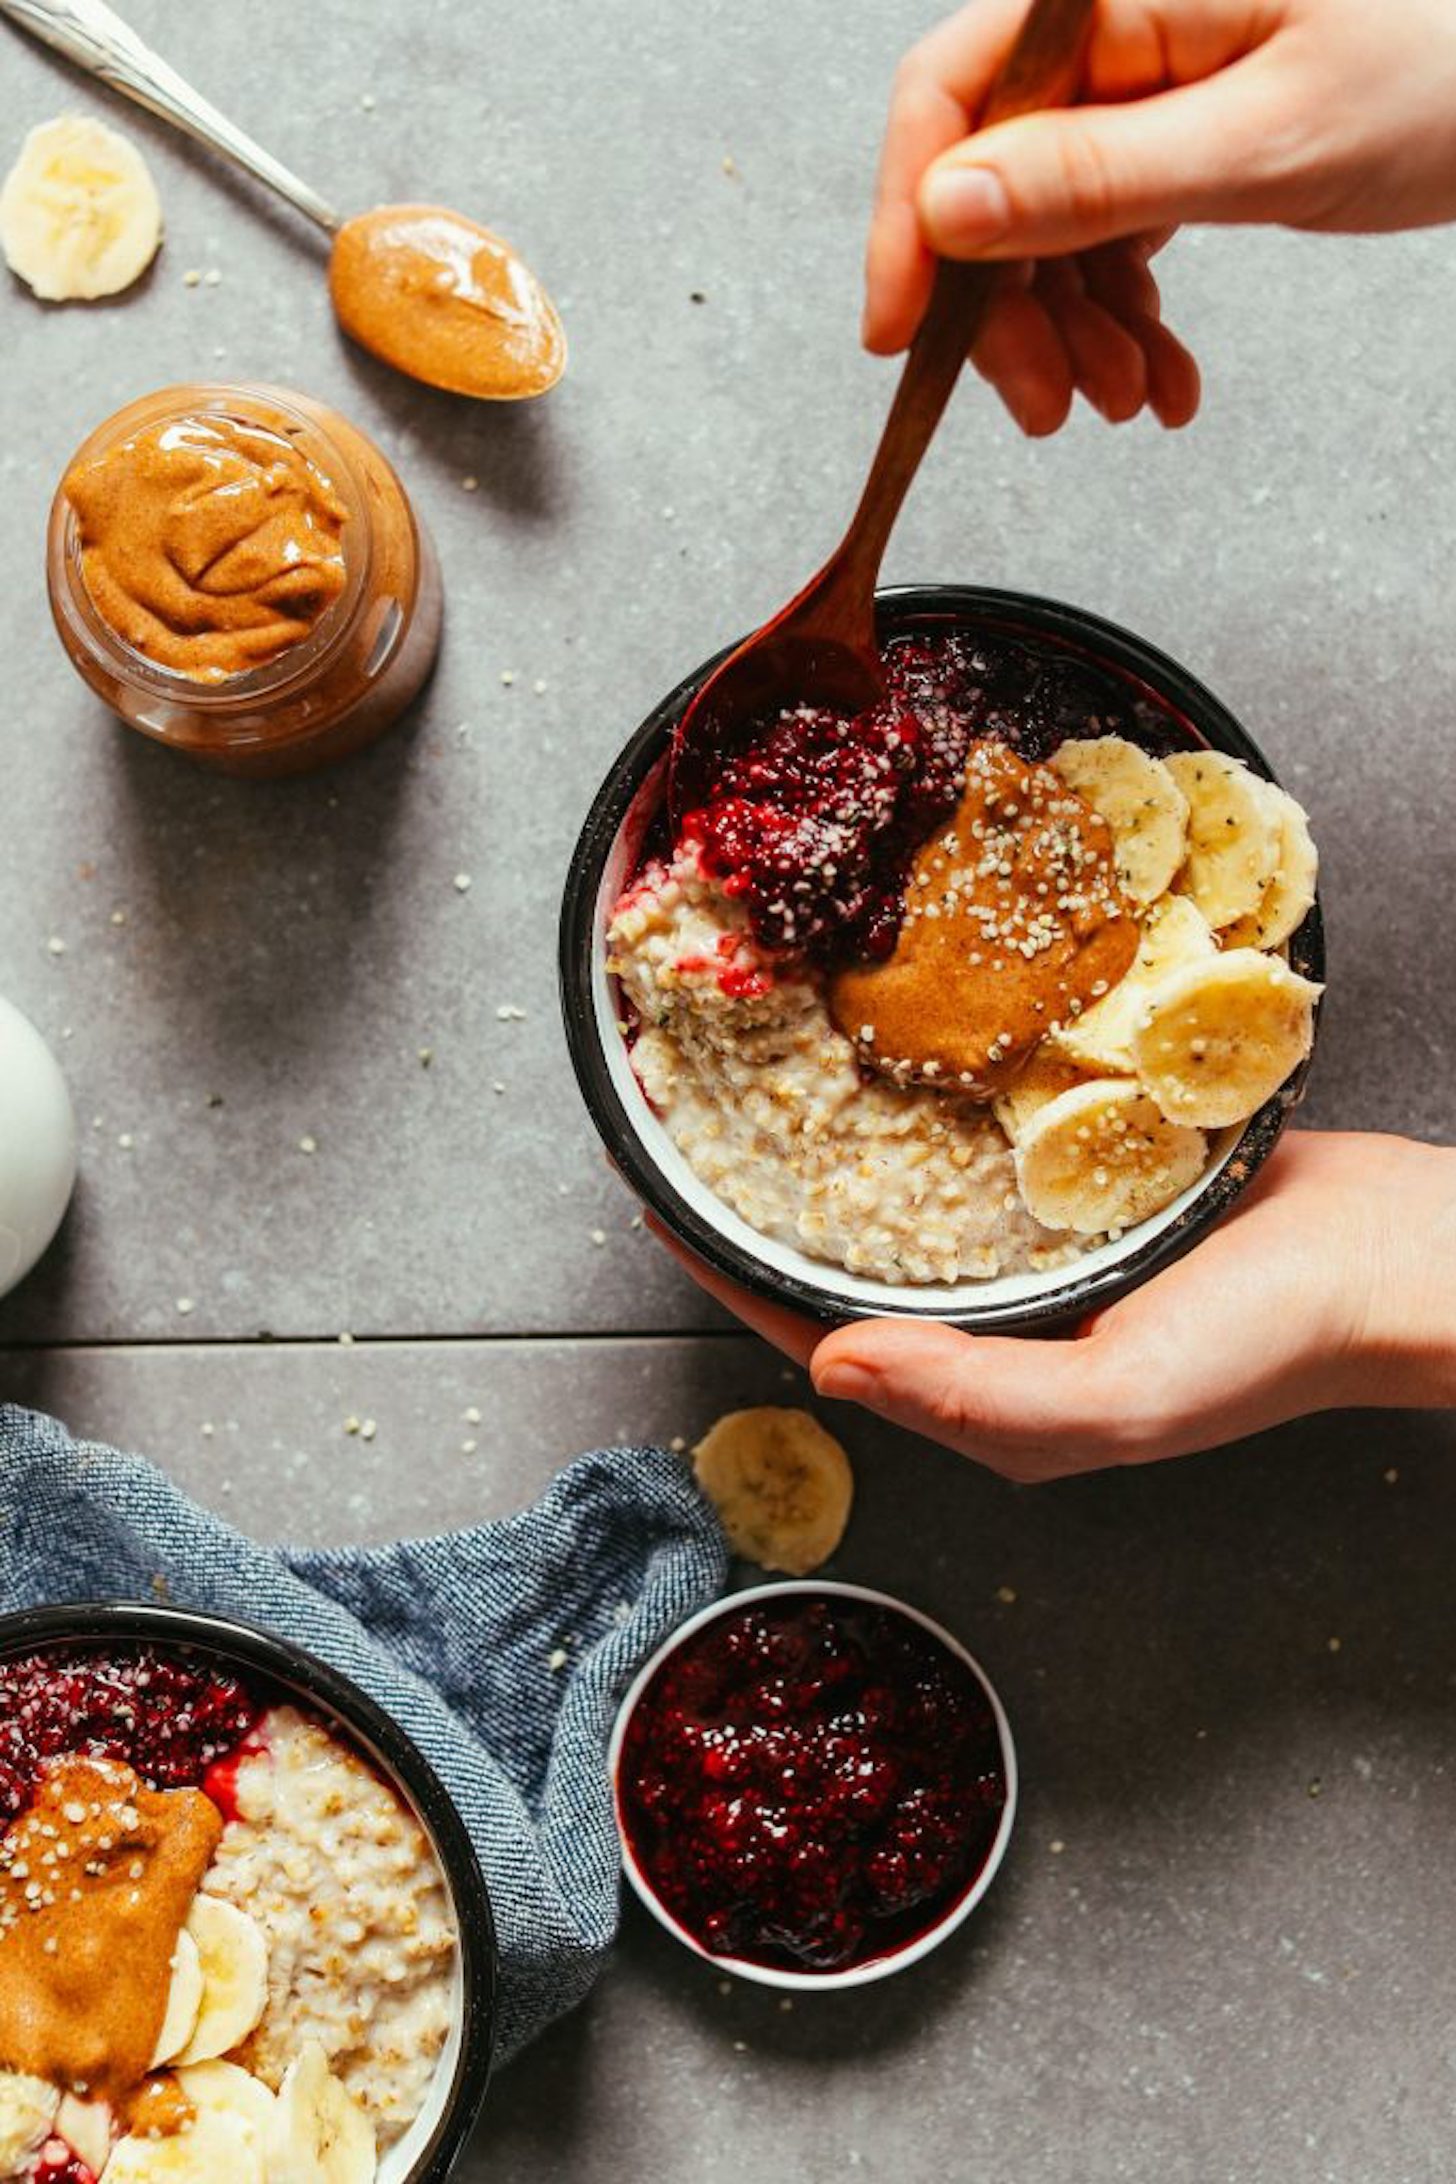 https://minimalistbaker.com/wp-content/uploads/2020/04/PERFECT-Fluffy-tender-steel-cut-oats-Step-by-step-instructions-5-ingredients-naturally-sweetened-oatmeal-vegan-glutenfree-plantbased-minimalistbaker-12-709x1024-1.jpg